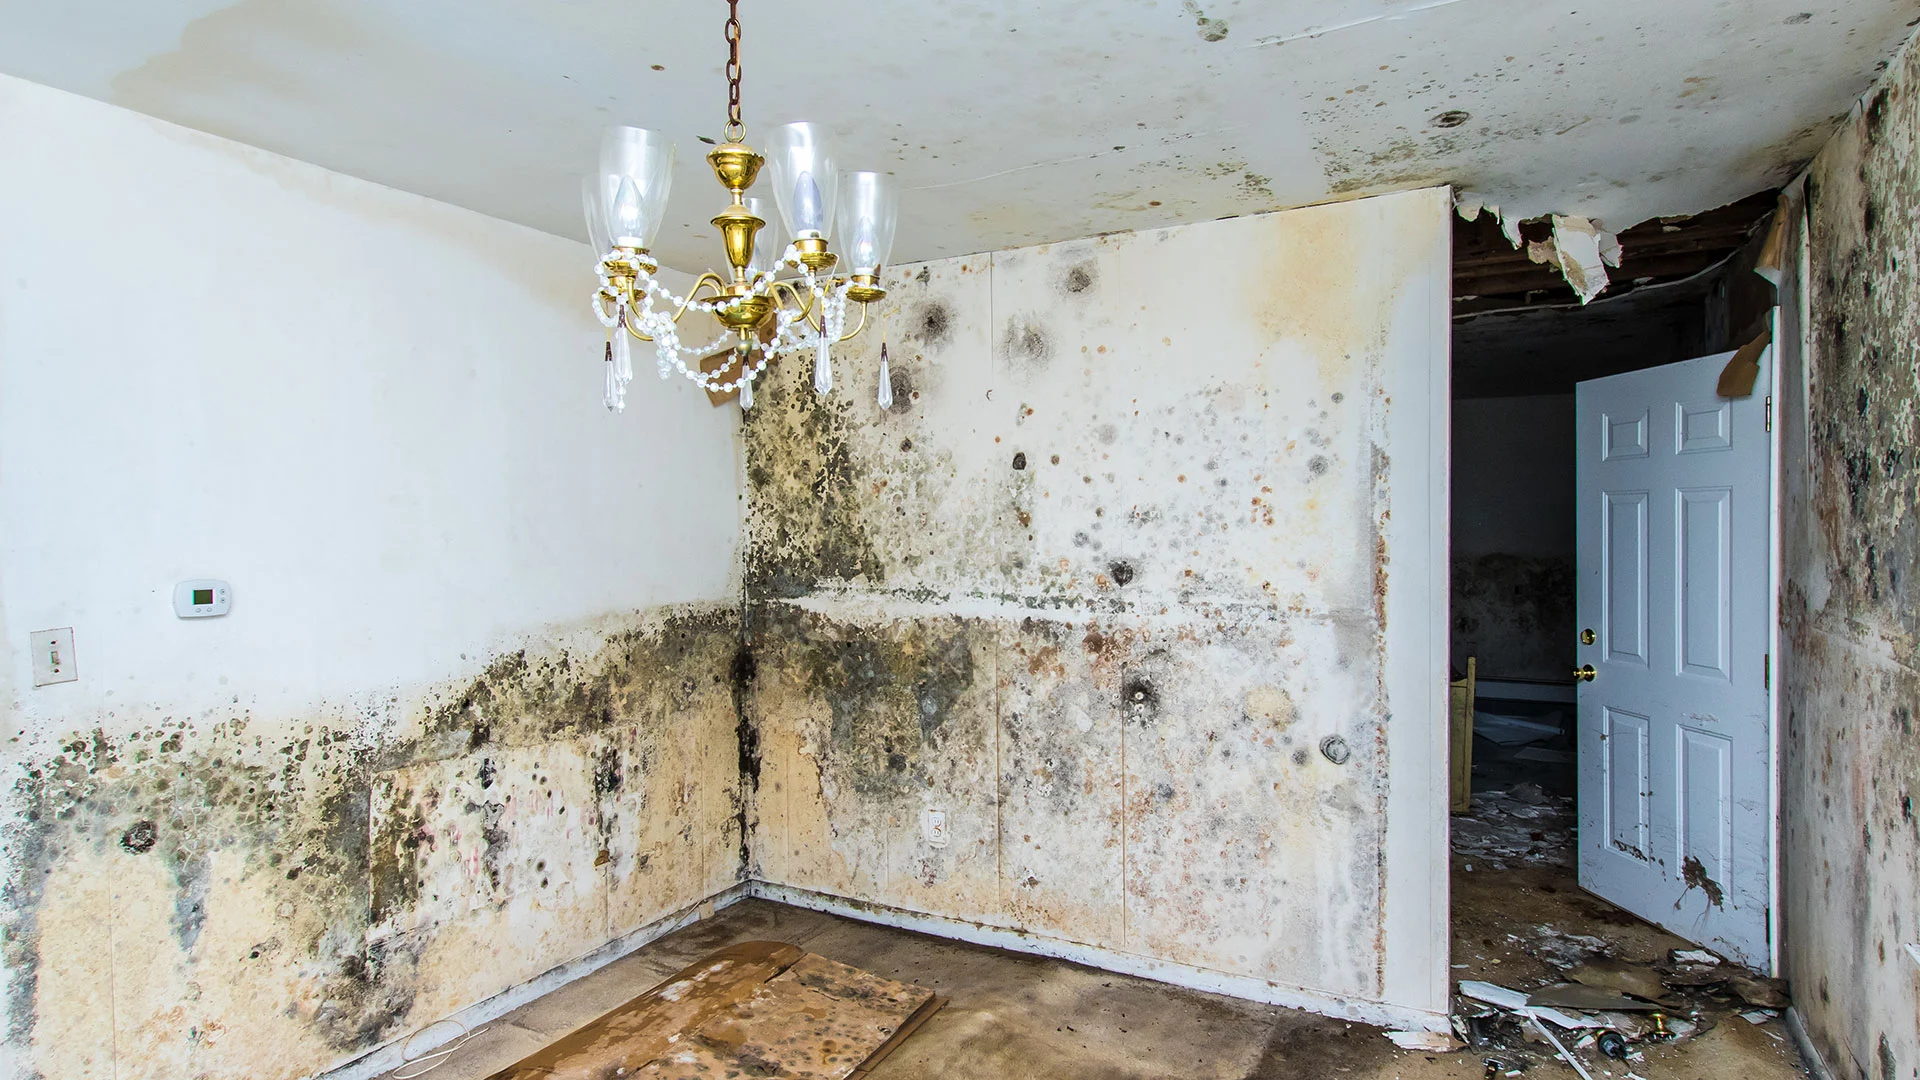 3 Signs You Are Choosing the Right Restoration Company